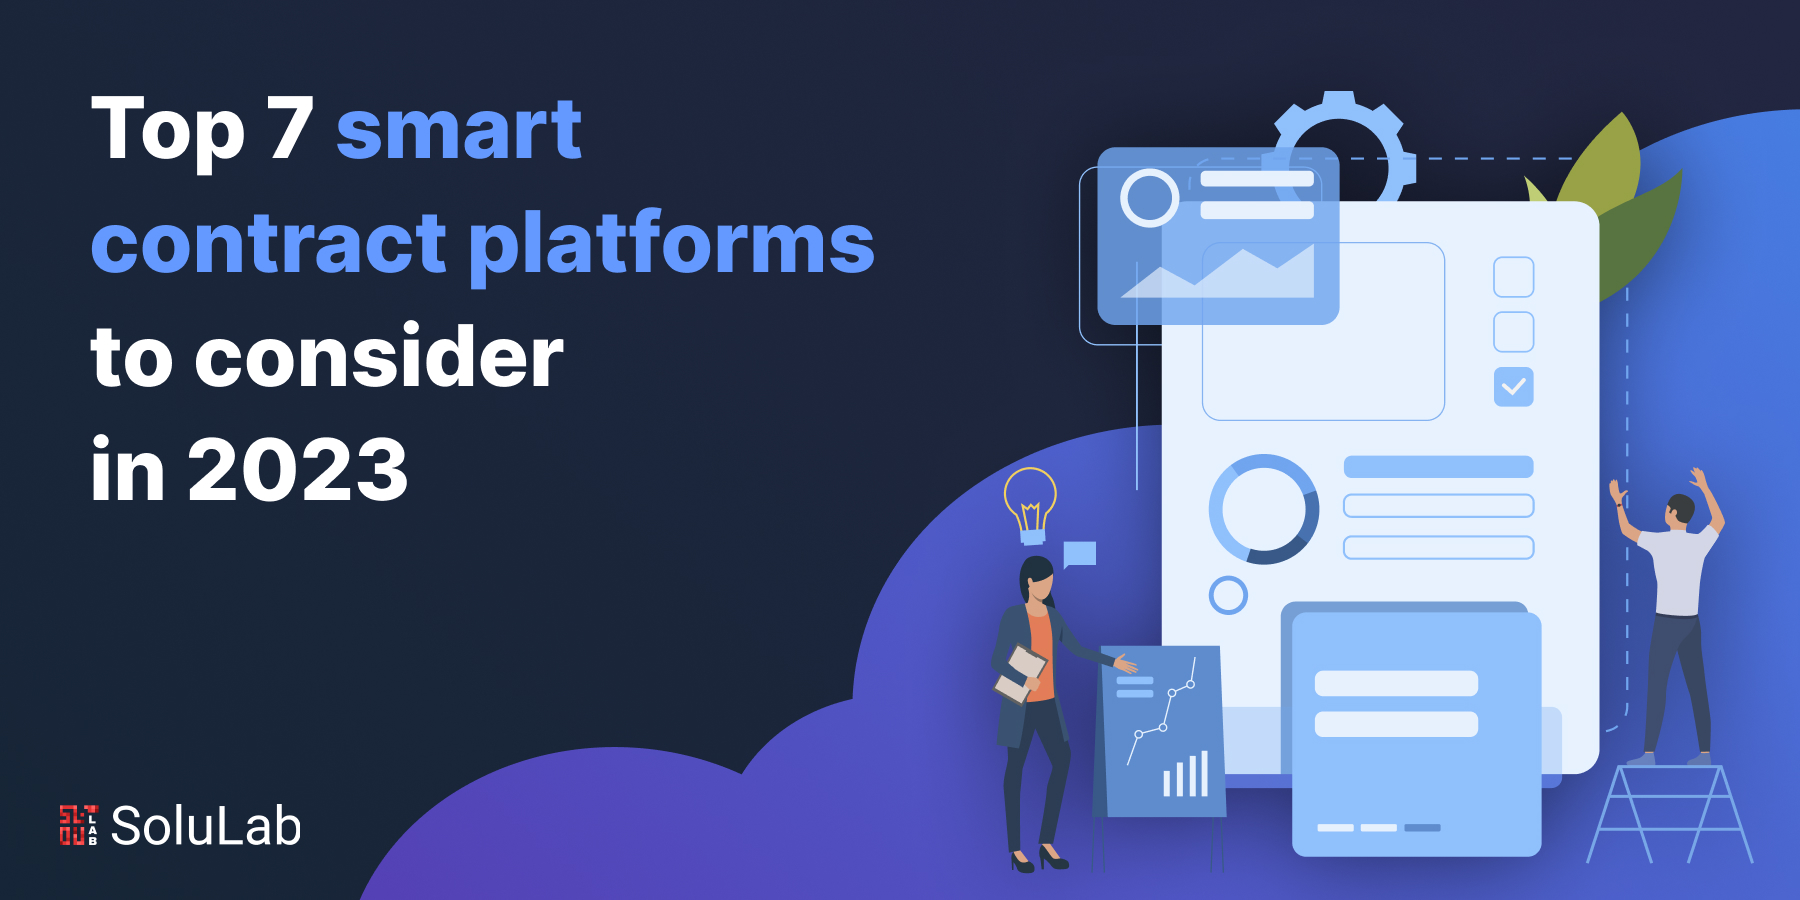 Top 7 smart contract platforms to consider in 2023